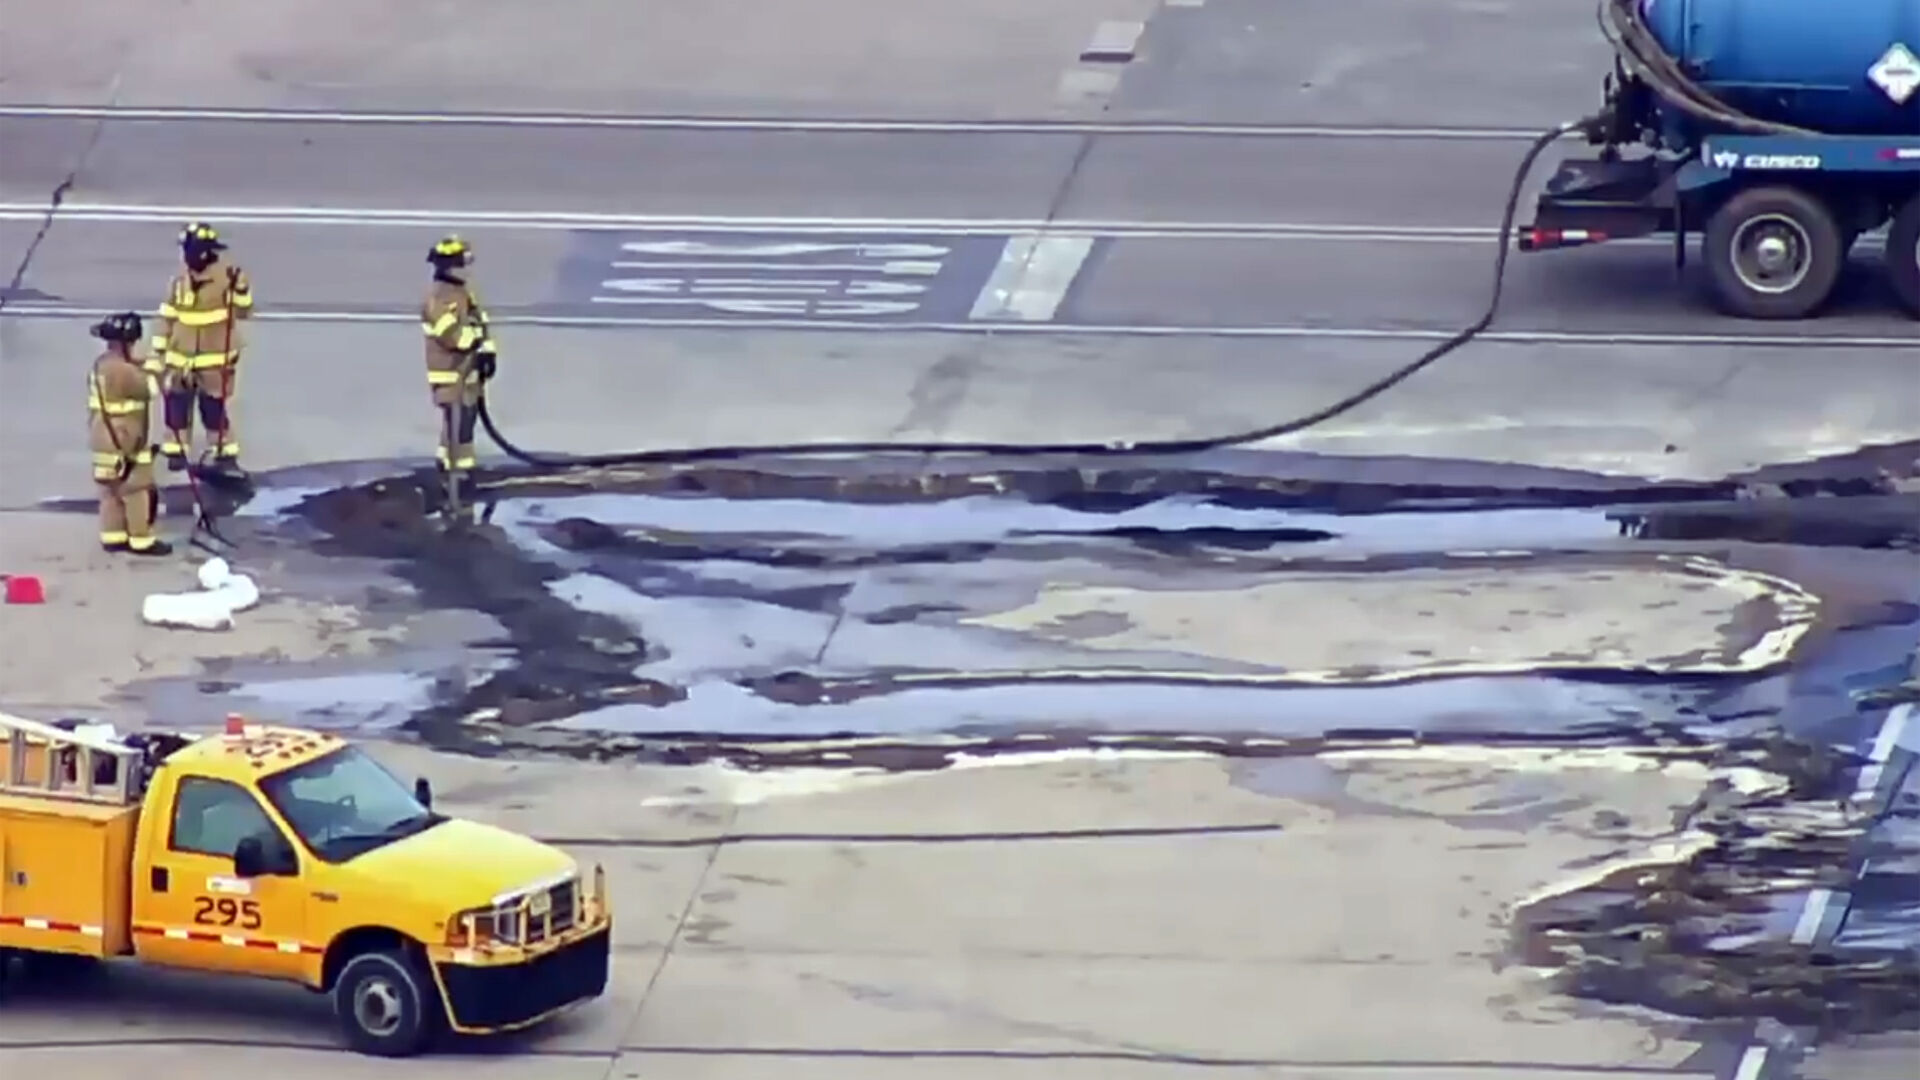 Fuel leak cleaned up at Dulles International Airport WTOP News